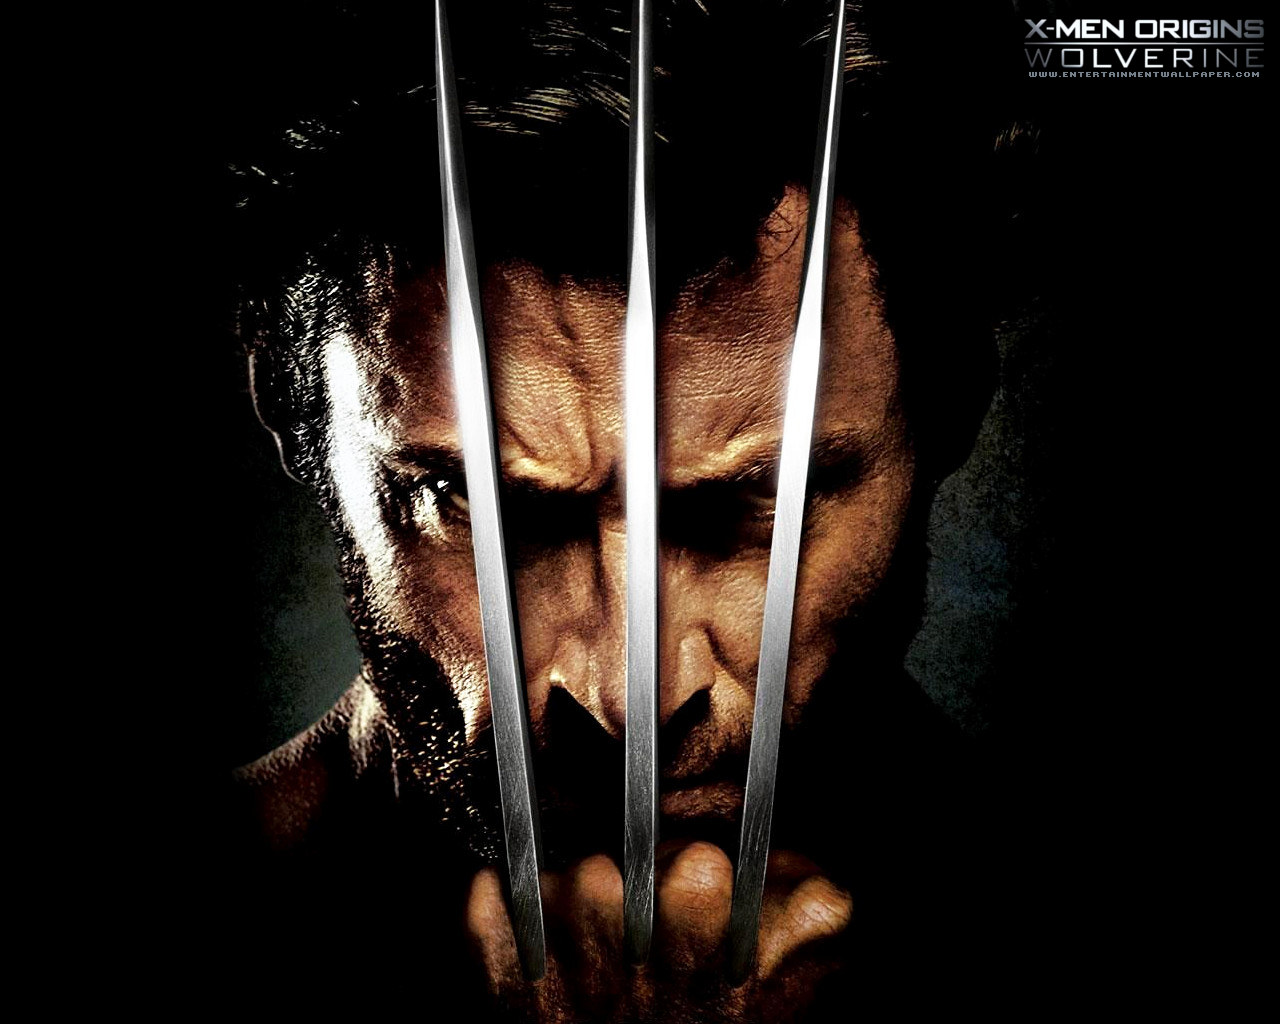 X Men Wolverine Hd Wallpapers | My Heart up Close